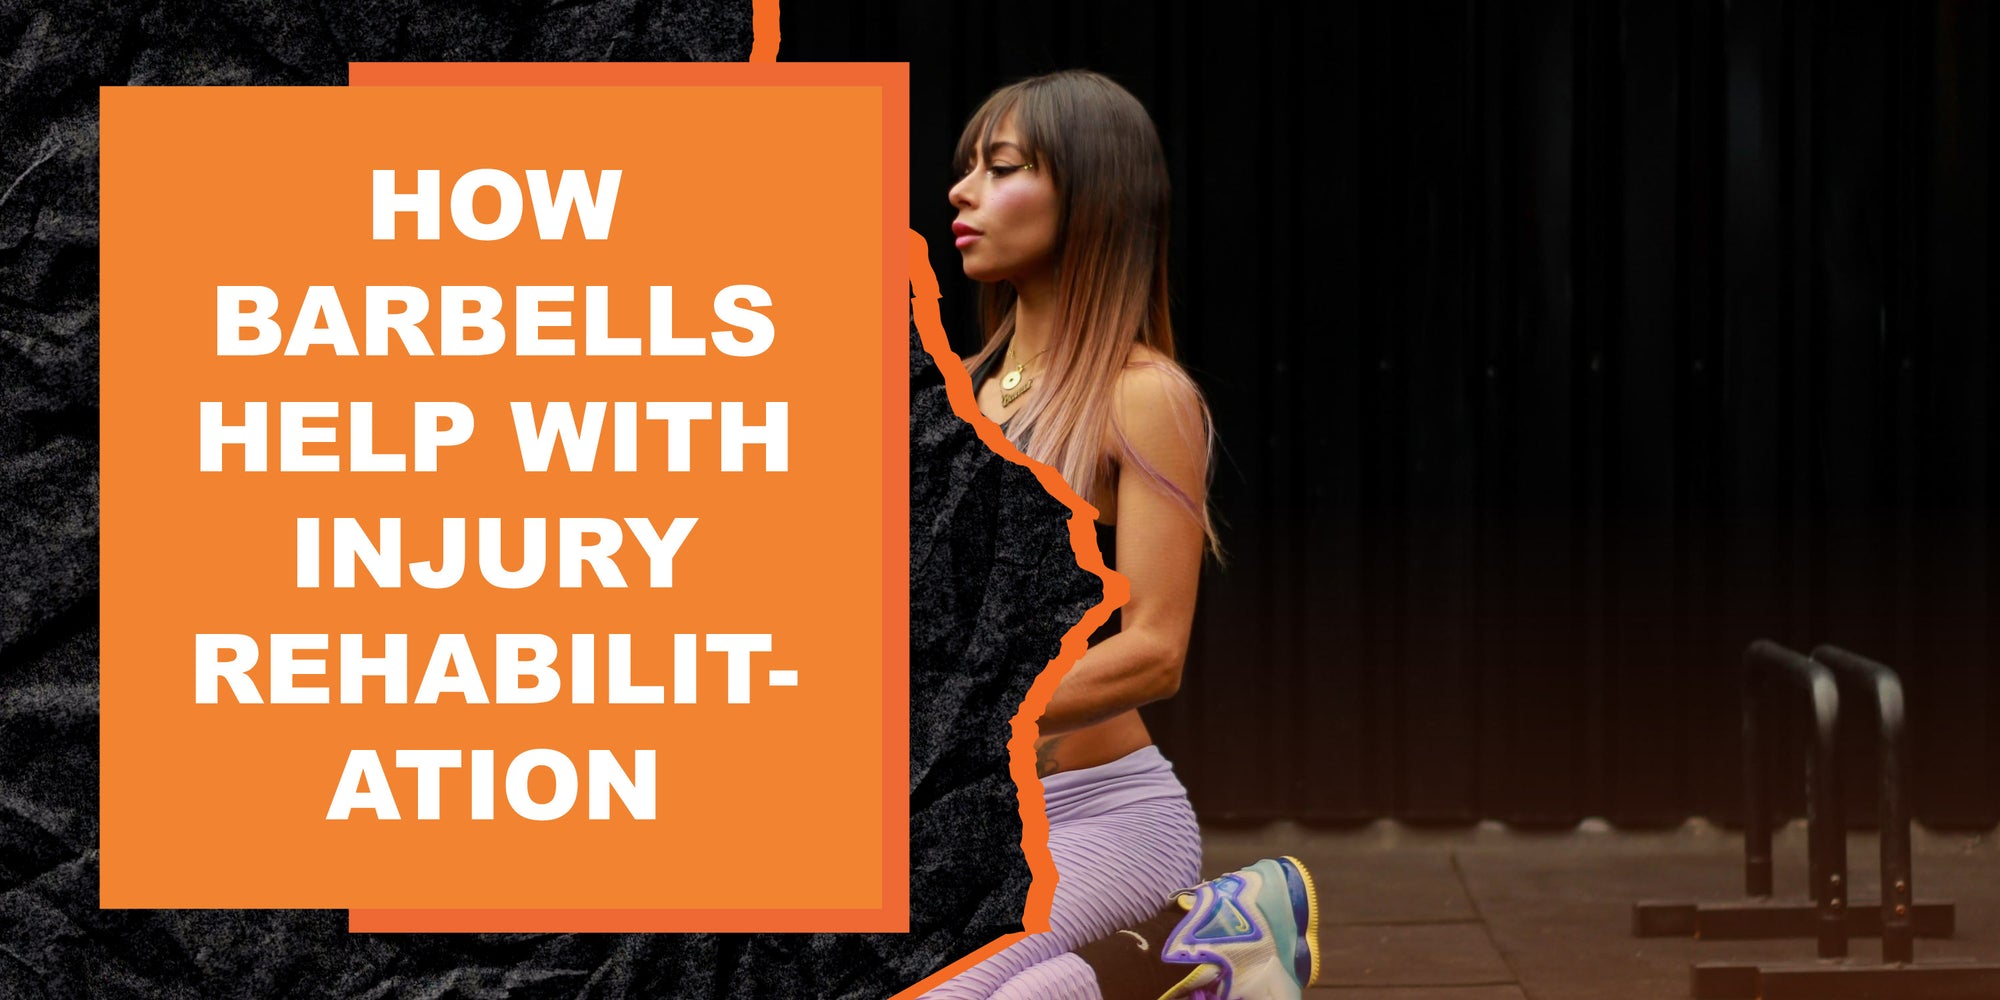 How Barbells Help with Injury Rehabilitation